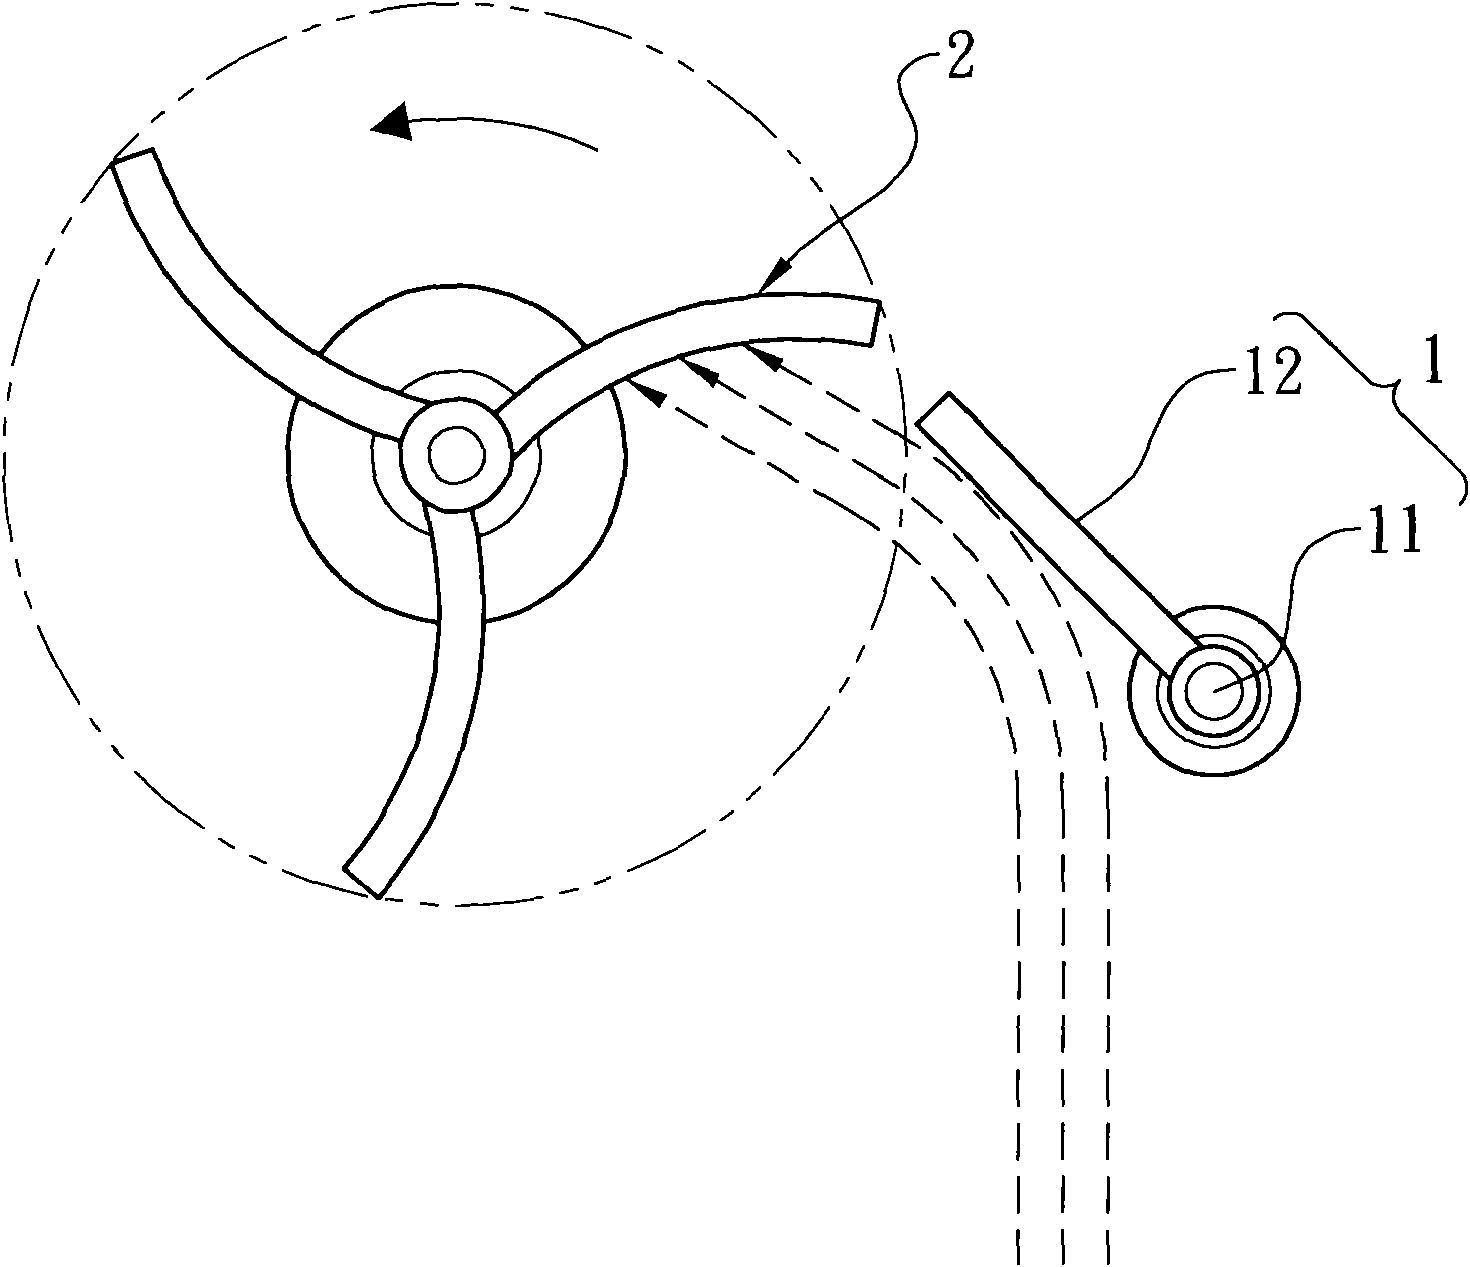 Wind-guiding device for vertical spindled windmill generator